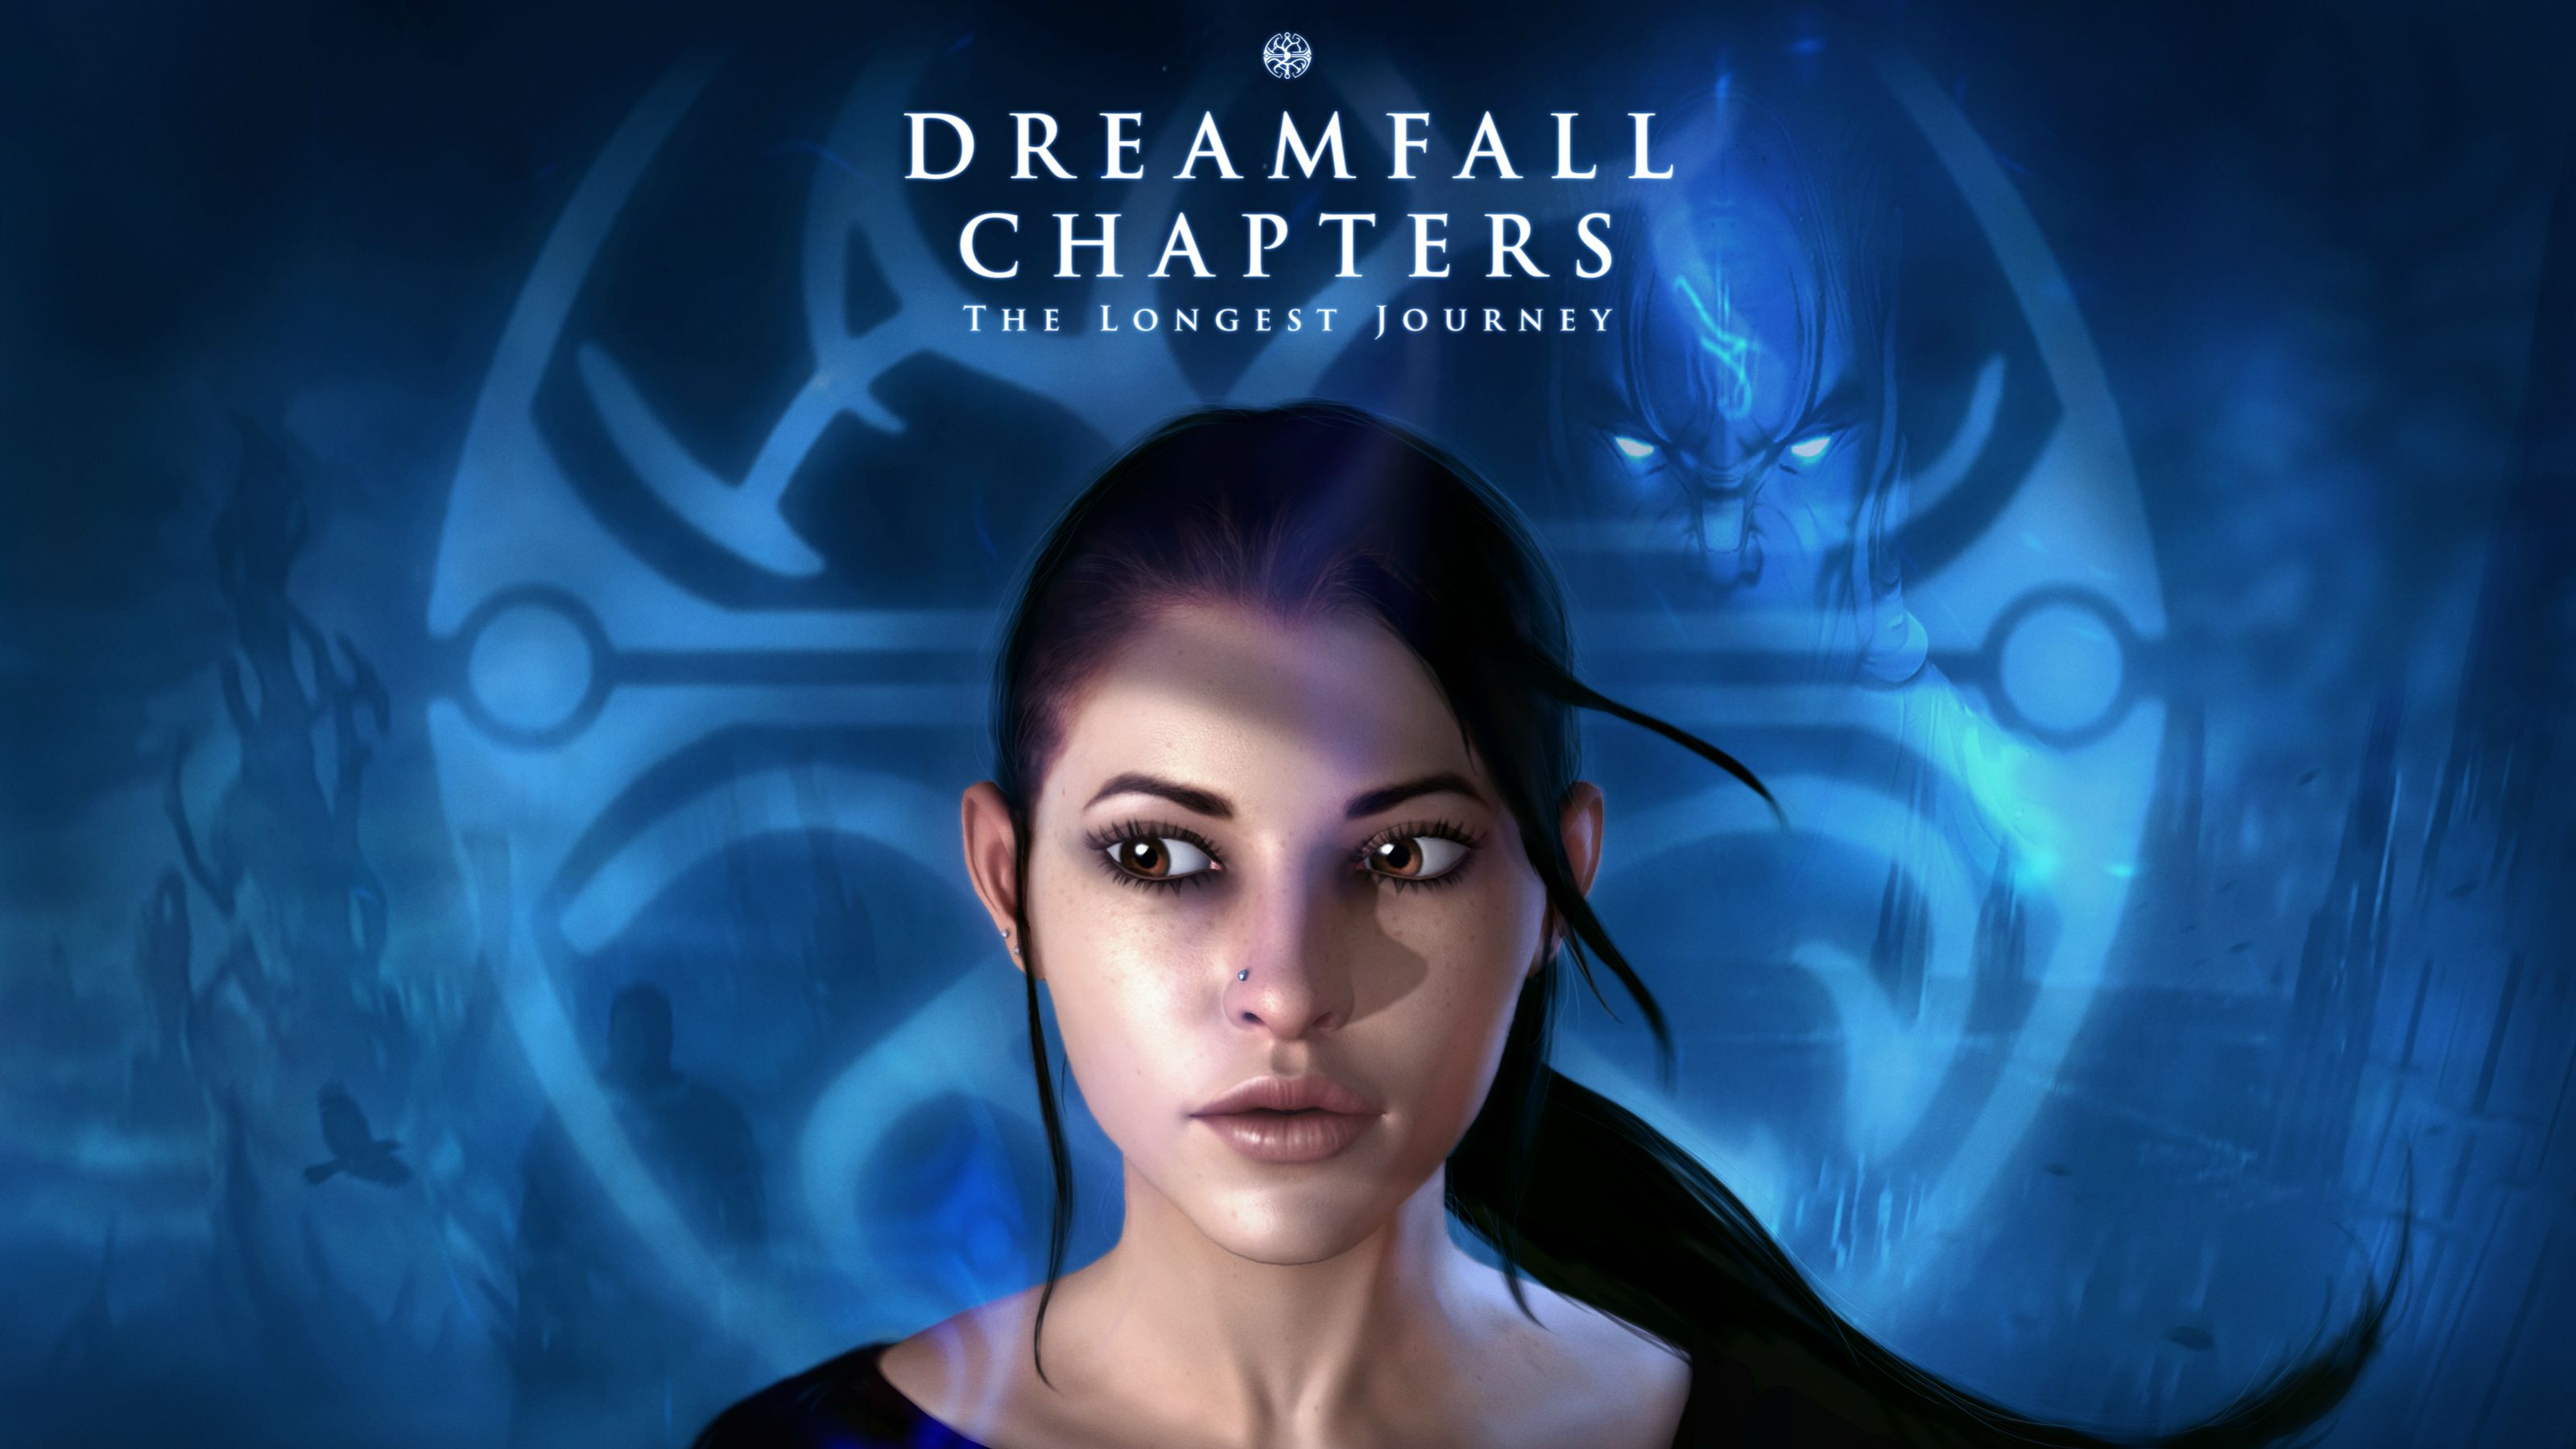 http://images.pushsquare.com/news/2013/05/dreamfall_chapters_the_longest_journey_could_be_coming_to_ps4/attachment/0/original.jpg